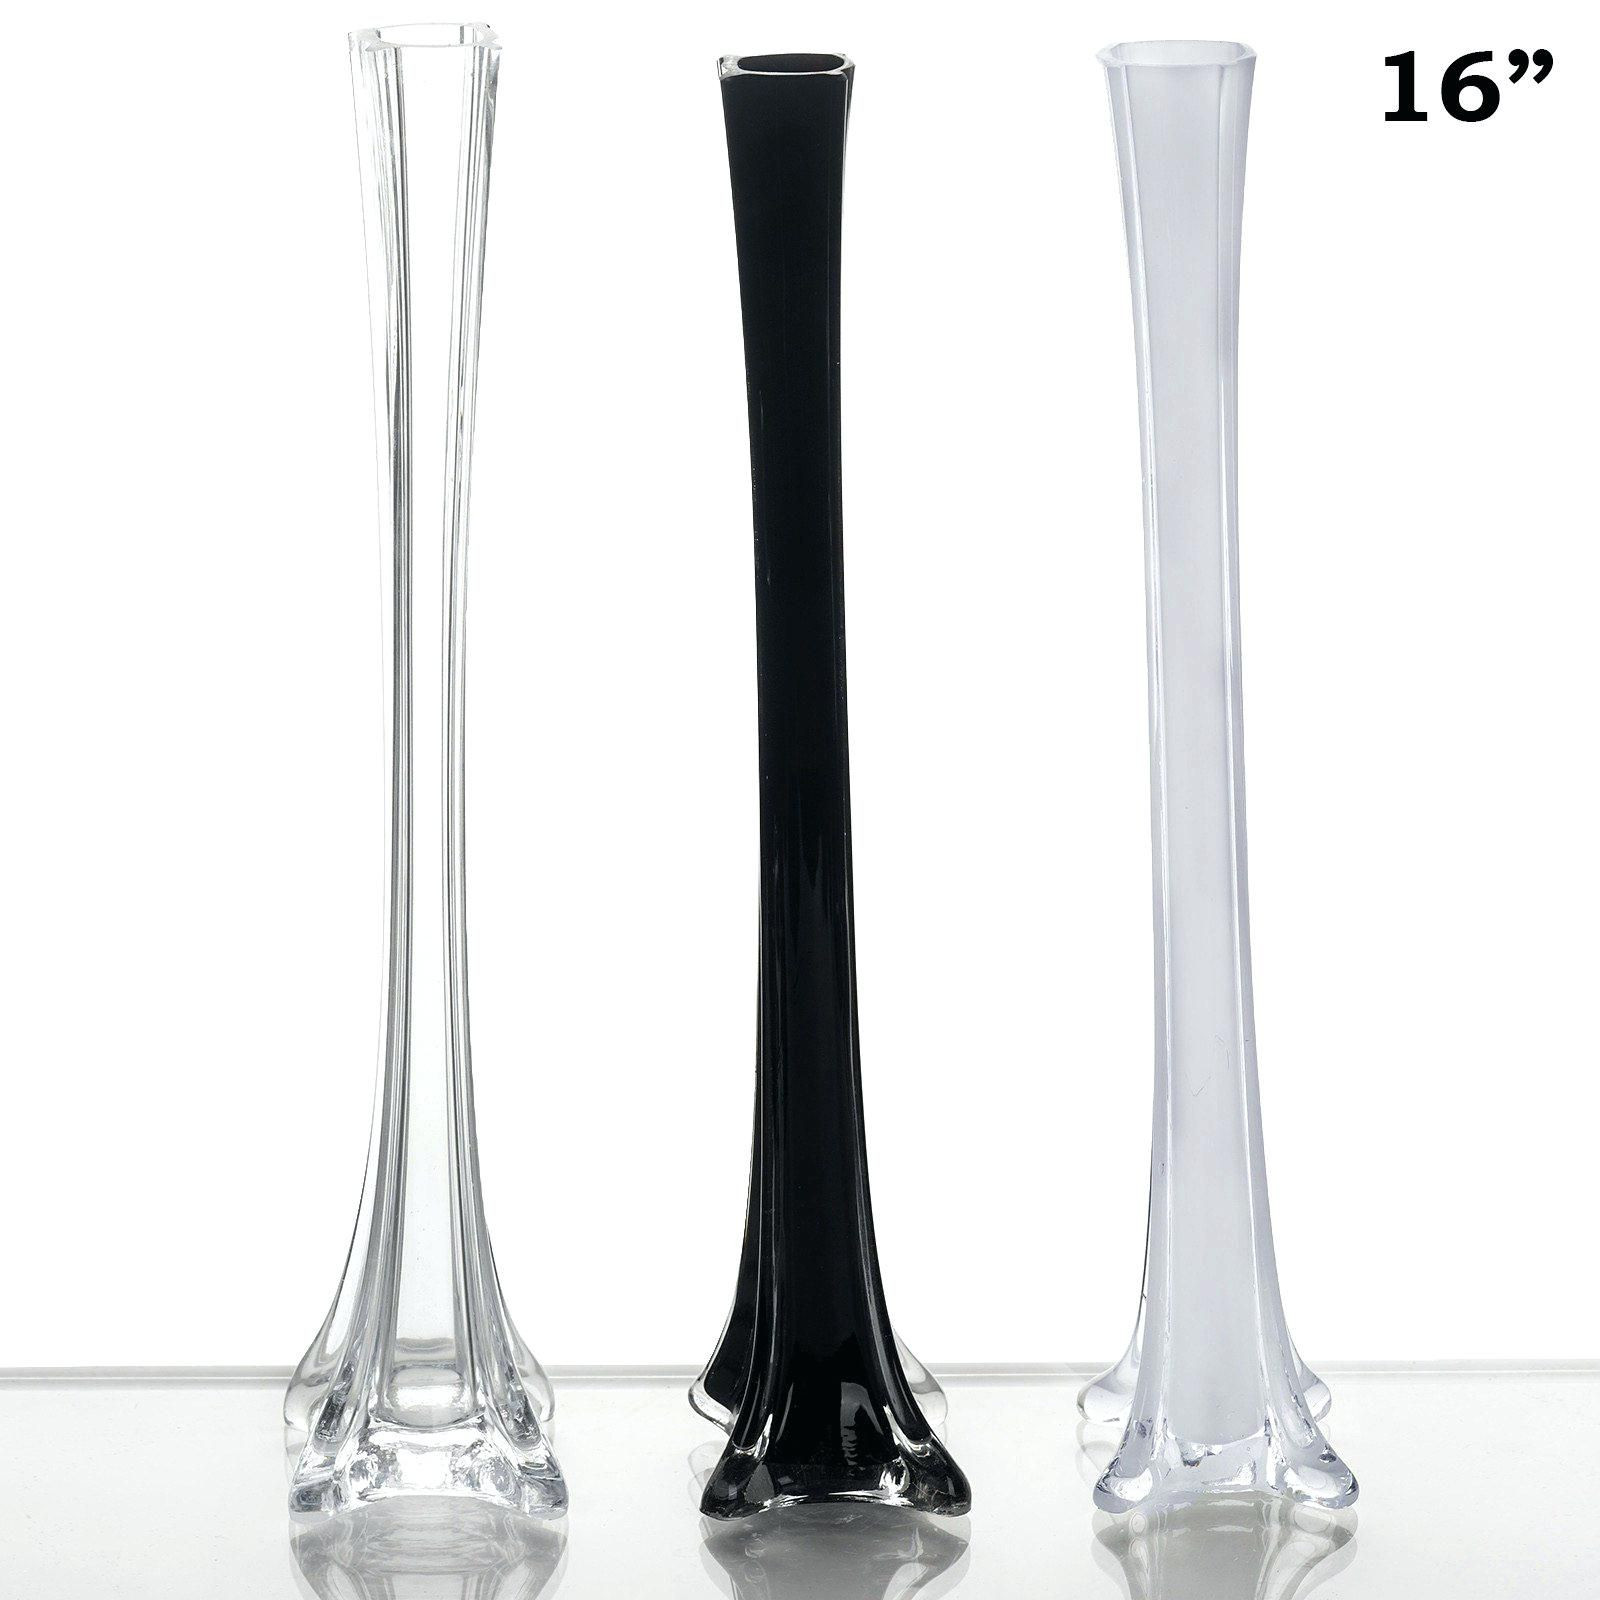 24 Amazing Tall Square Glass Vases wholesale 2024 free download tall square glass vases wholesale of 40 glass vases bulk the weekly world in gallery plastic eiffel tower vases wholesale drawings art gallery